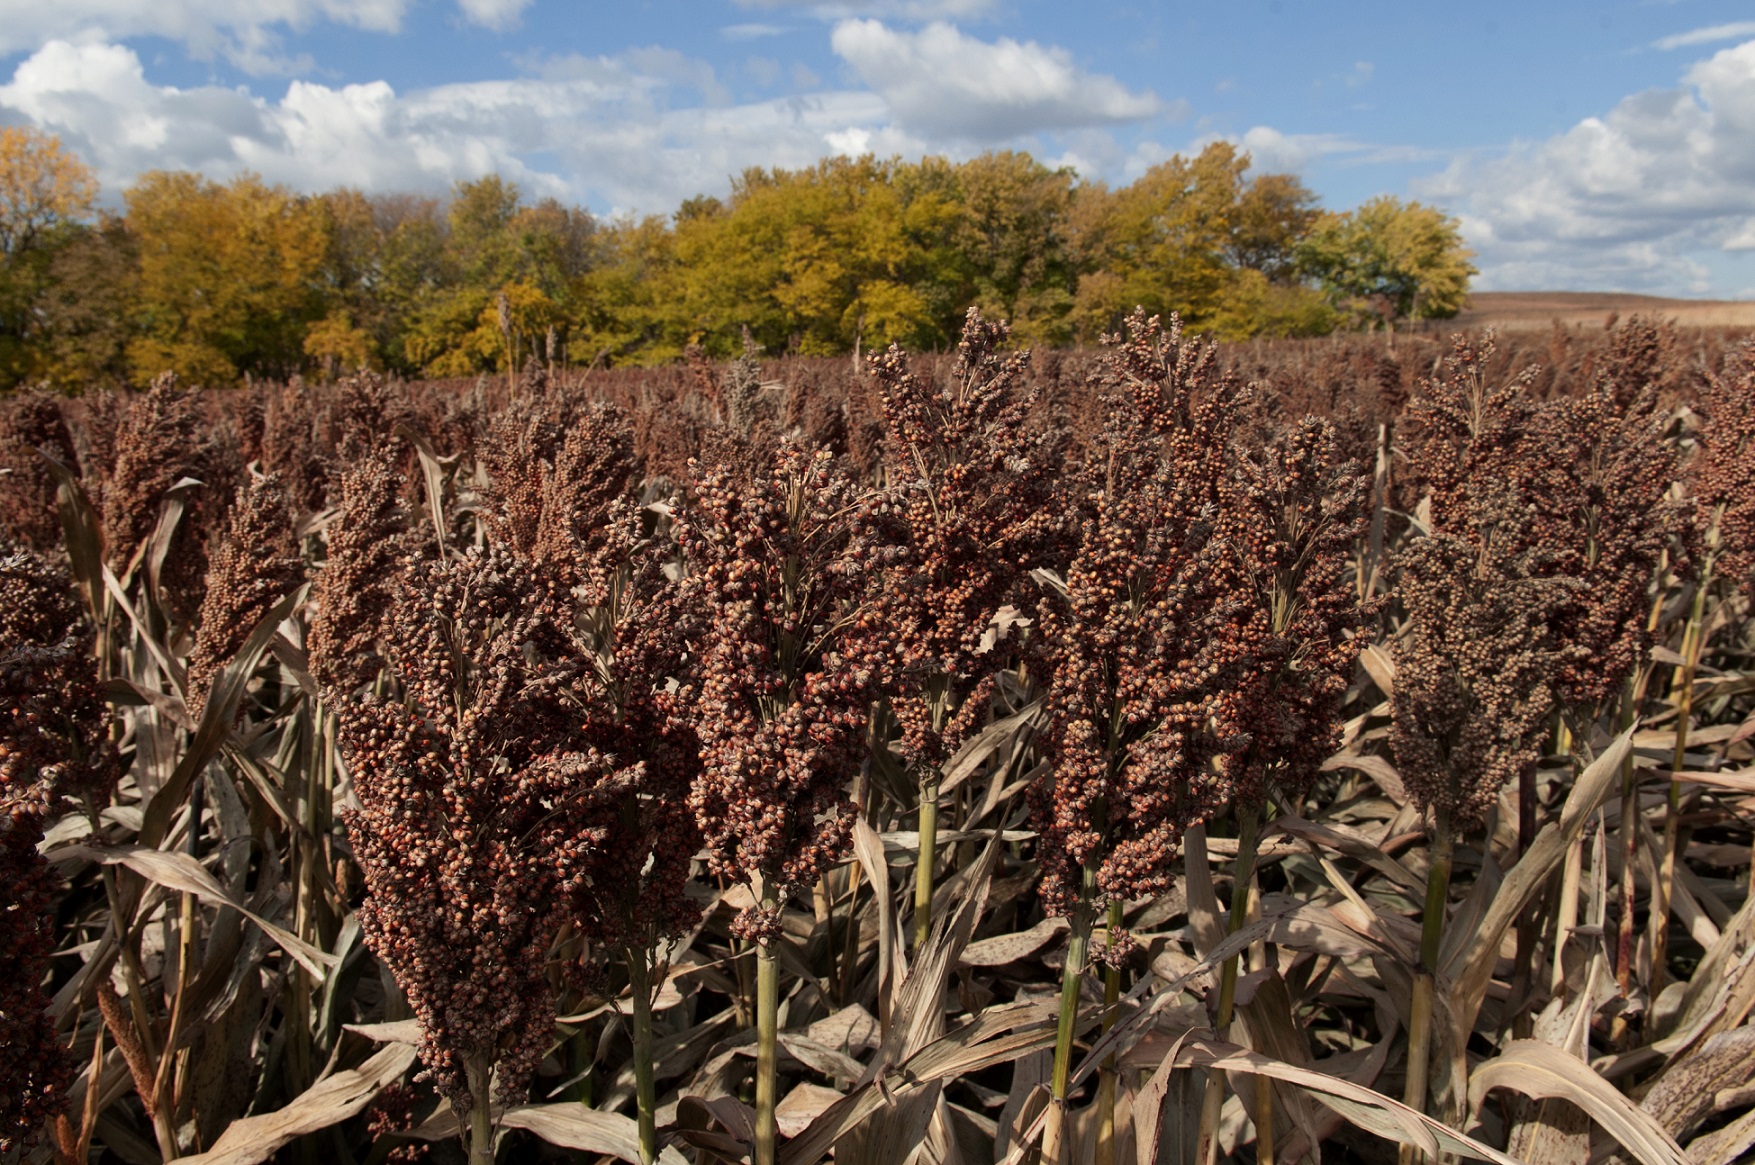 A field of red sorghum with a colorful fall forest in the background